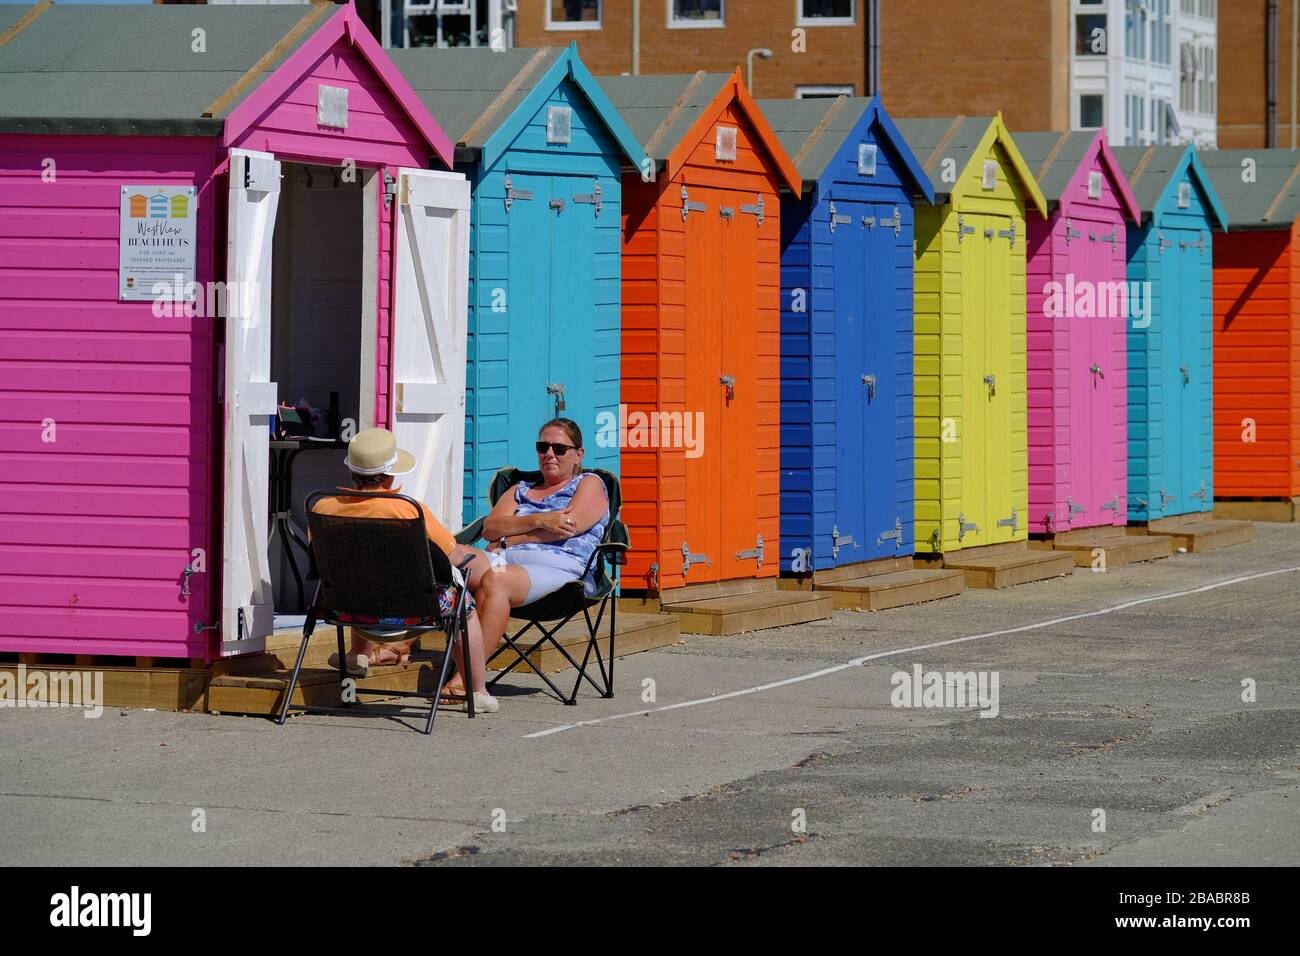 Couple relaxing by colourful beach huts, Seaford, UK Stock Photo